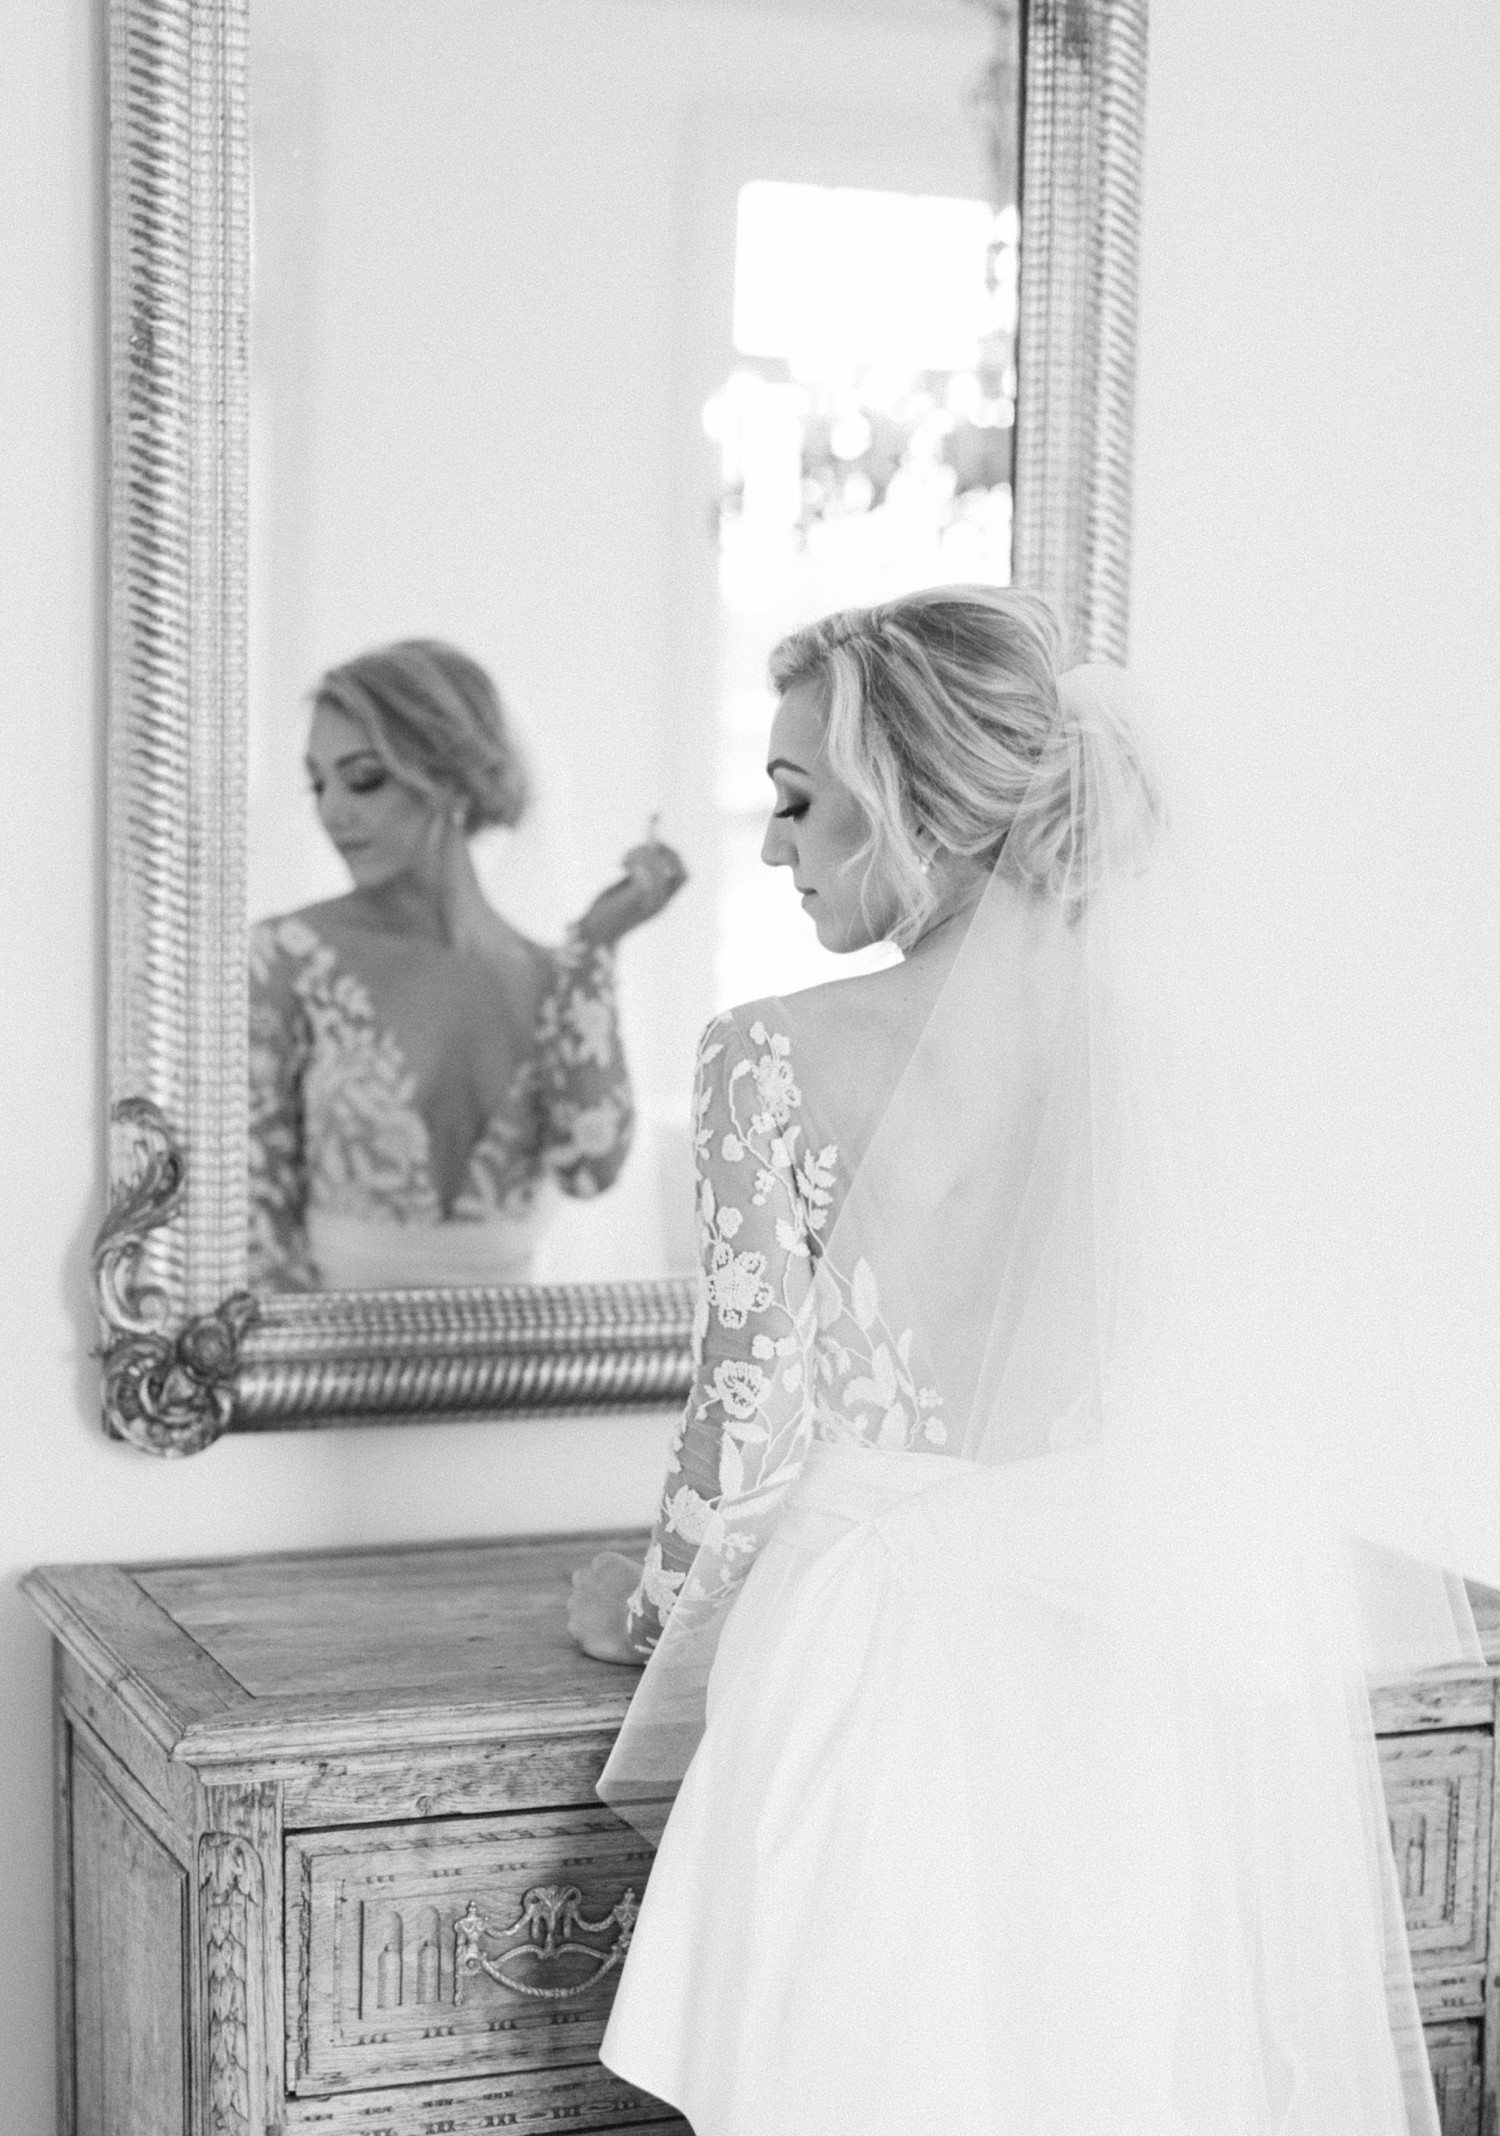 Reflection of bride putting on lipstick in mirror. 